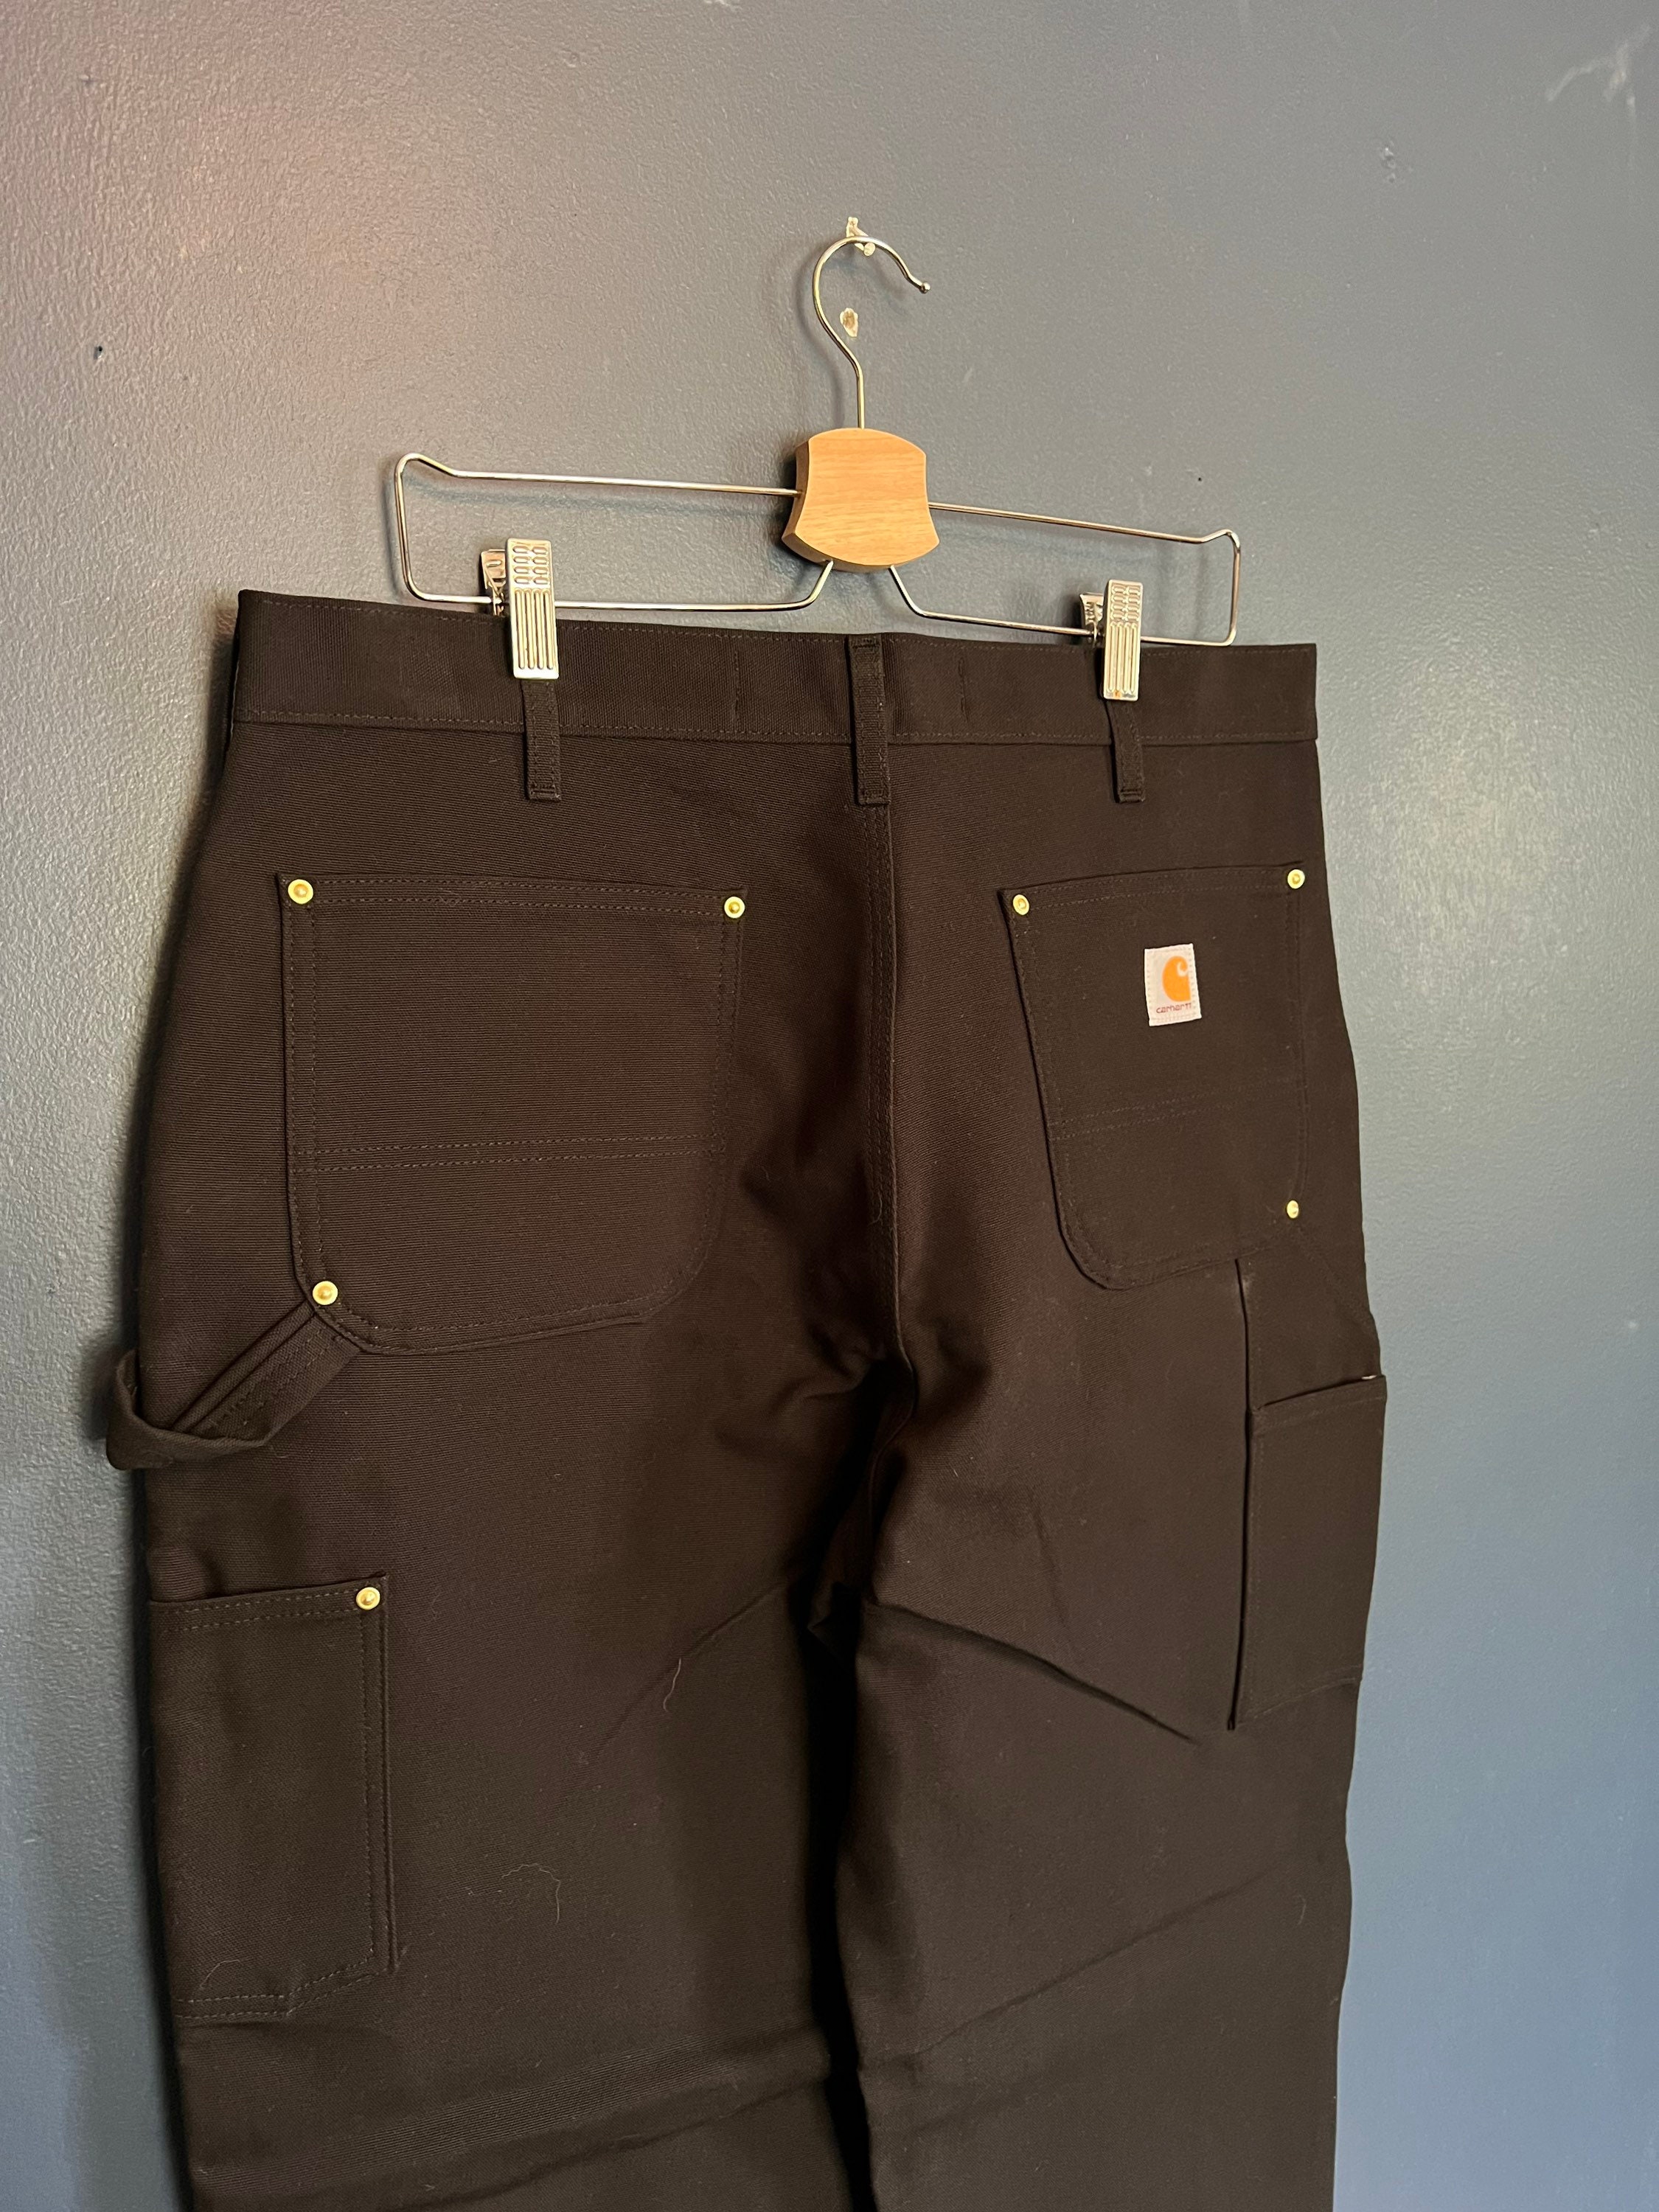 Carhartt Men's Pants Duck Double Front Stained Discolored Vintage 80's 36 x  30